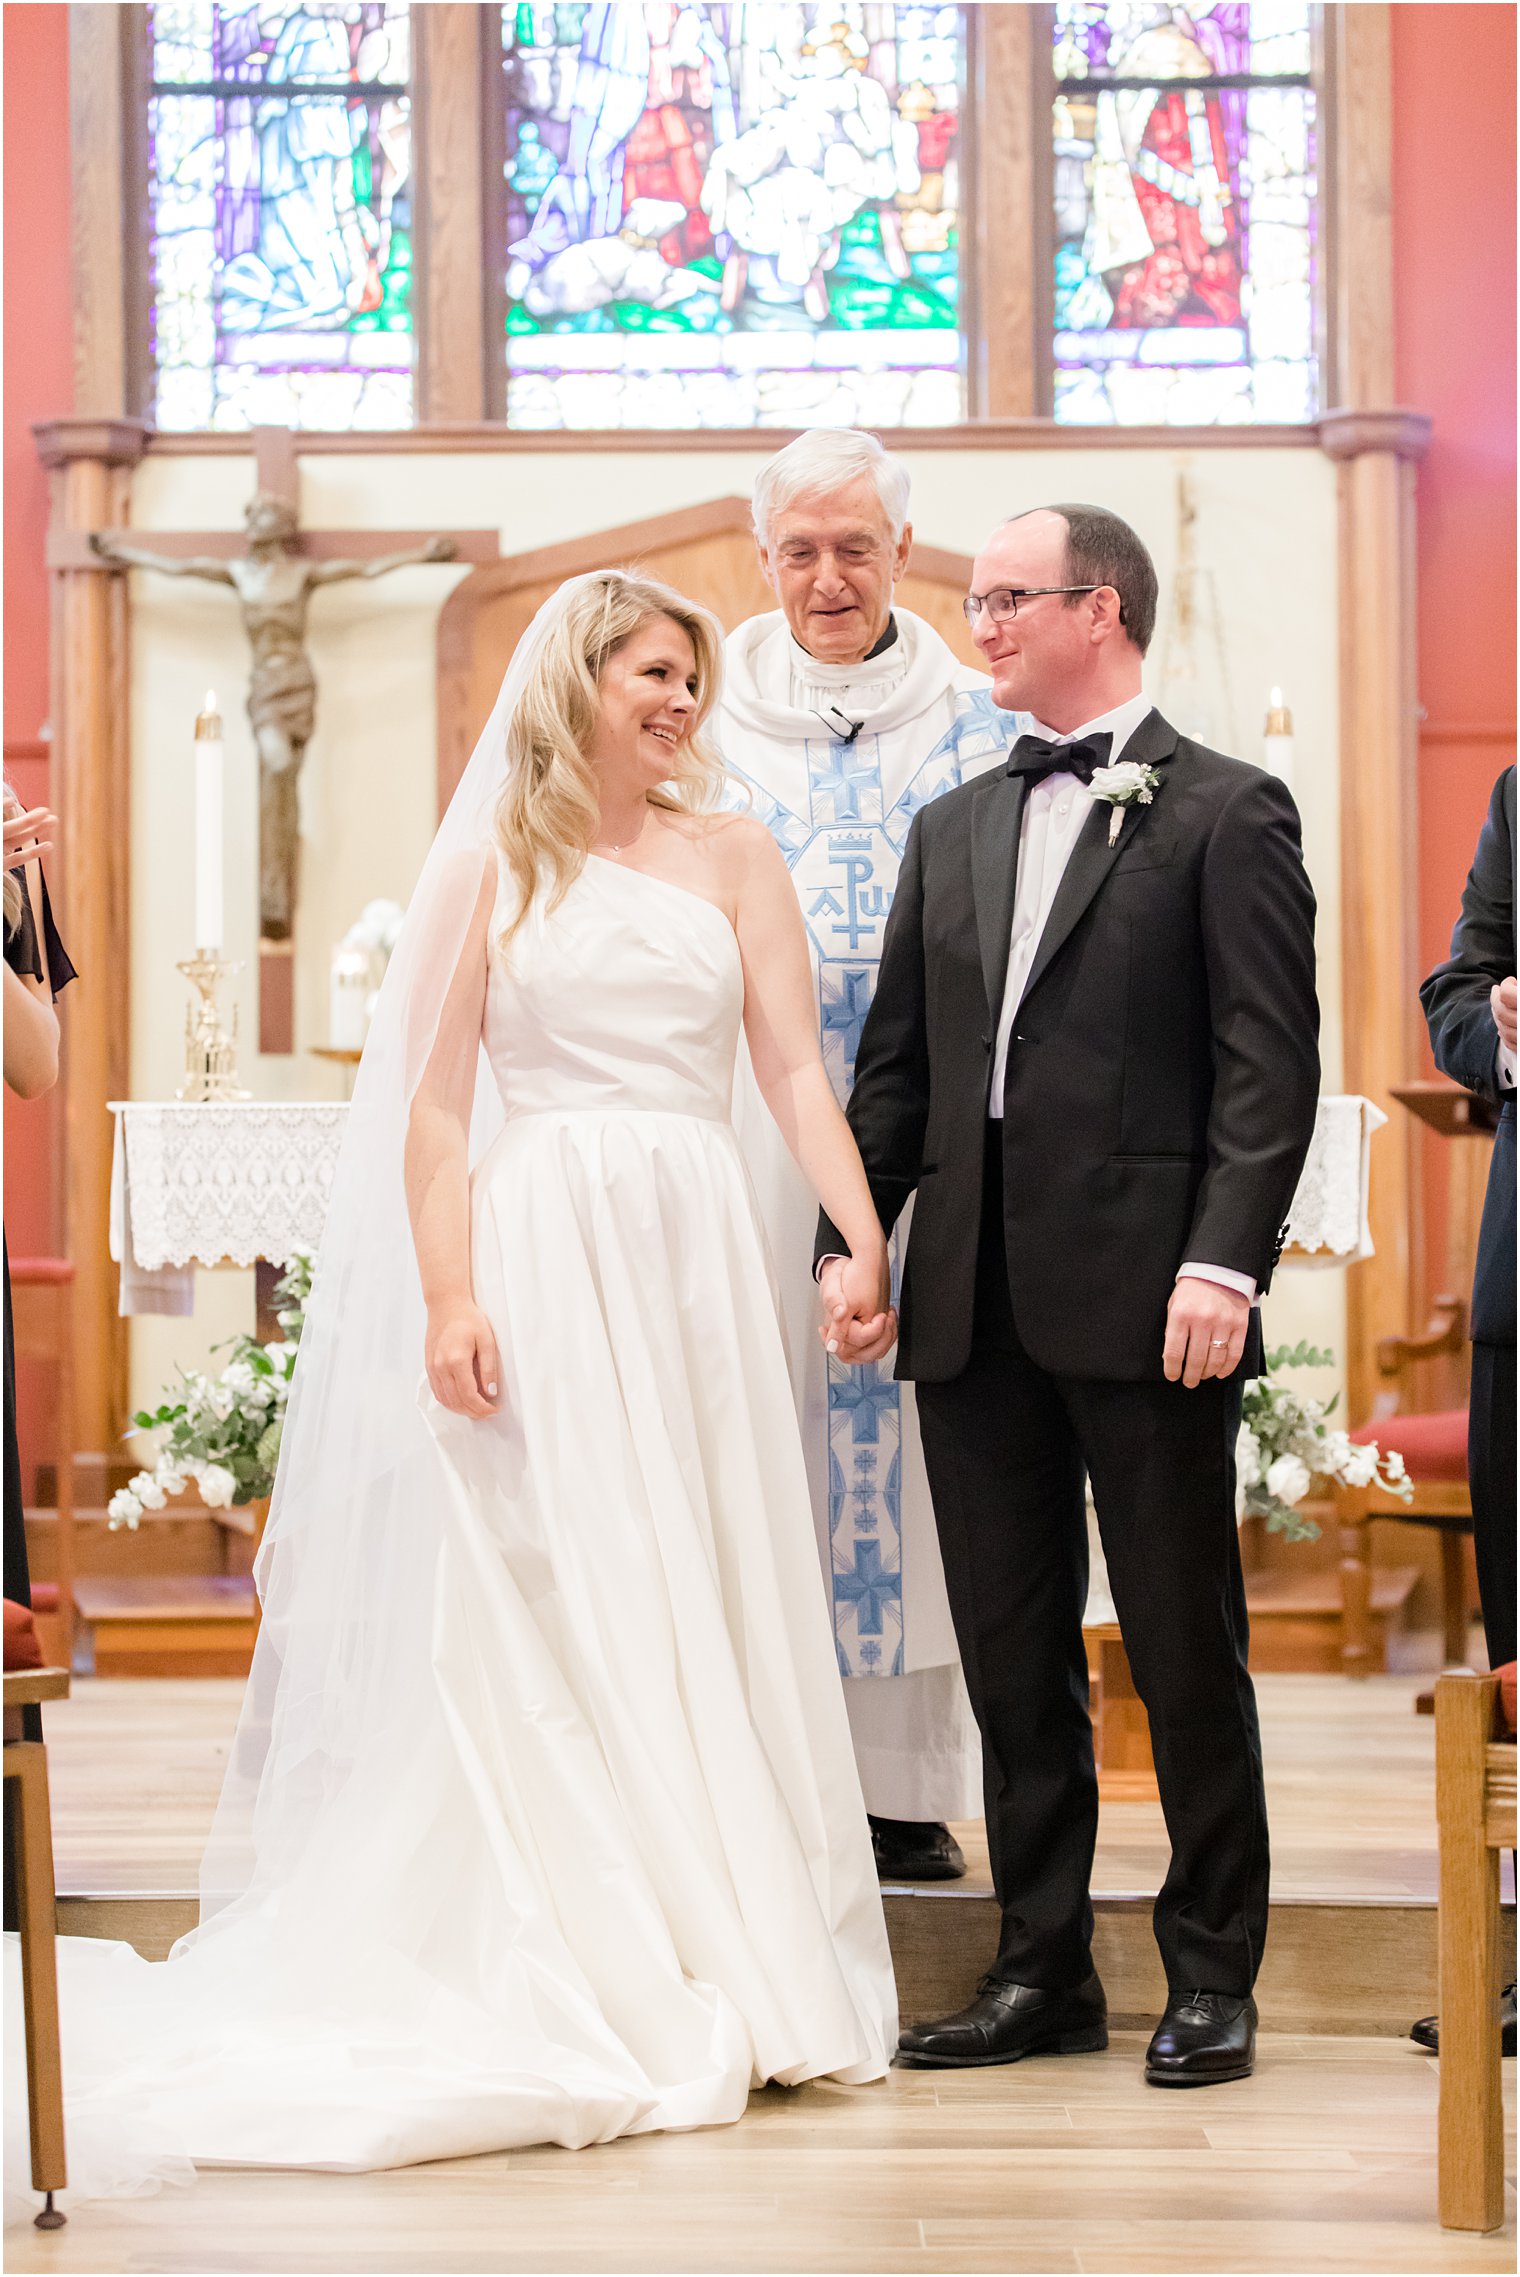 newlyweds smile at each other at end of traditional church wedding in New Jersey